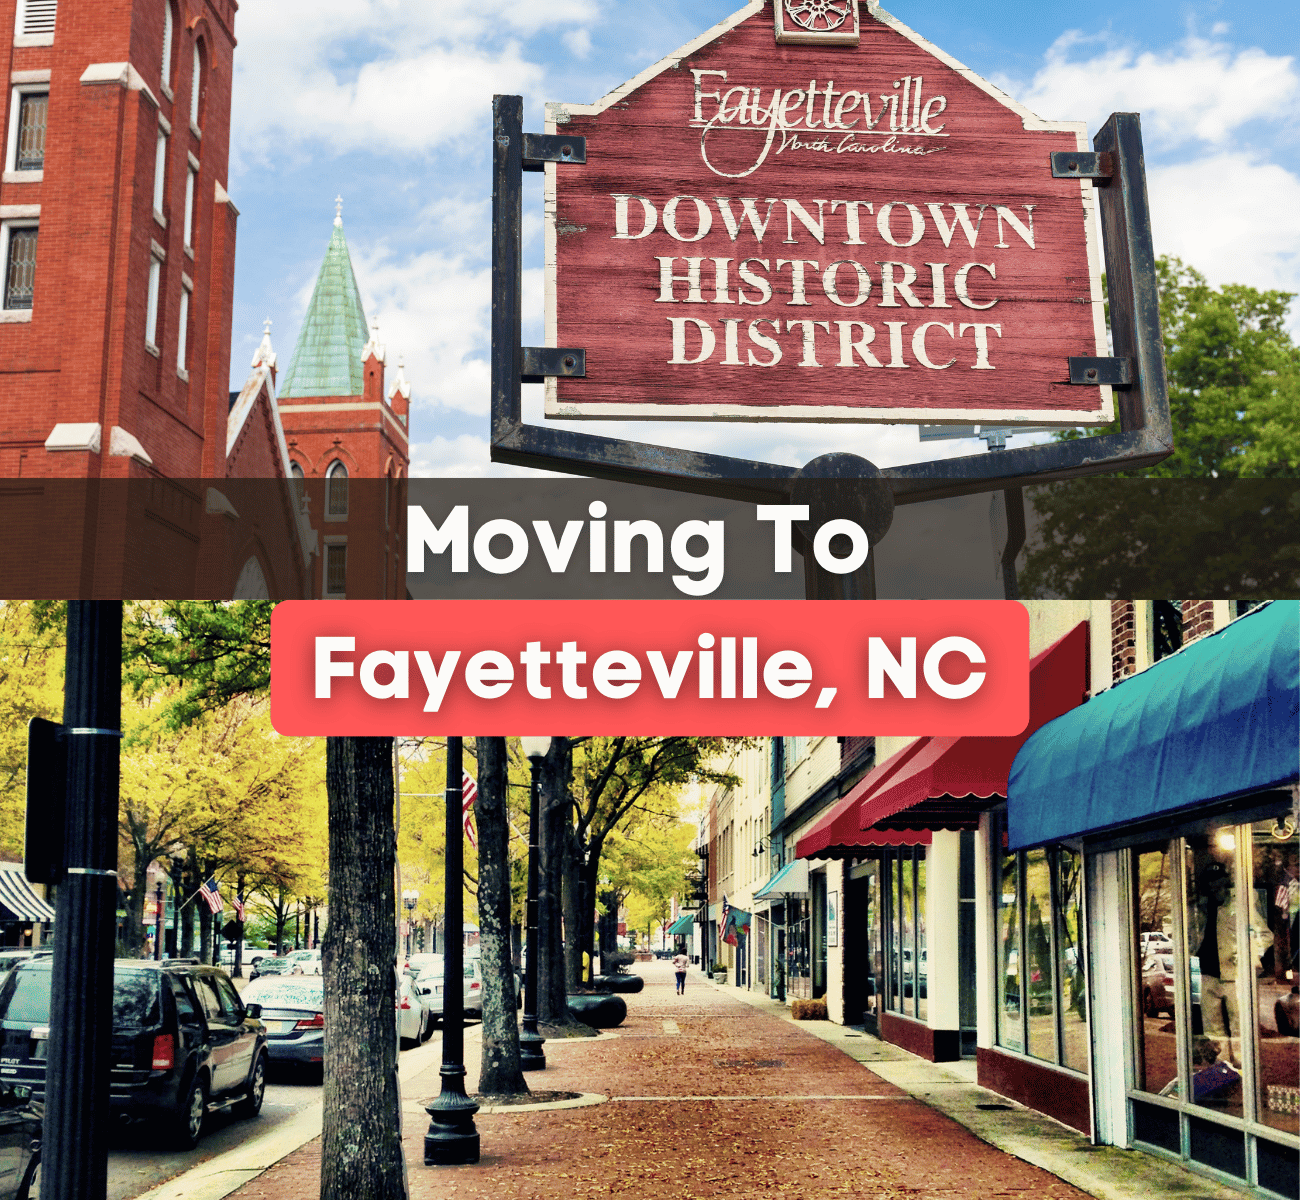 Moving to Fayetteville, NC - Downtown Historic District and Downtown Sidewalk in Fayetteville